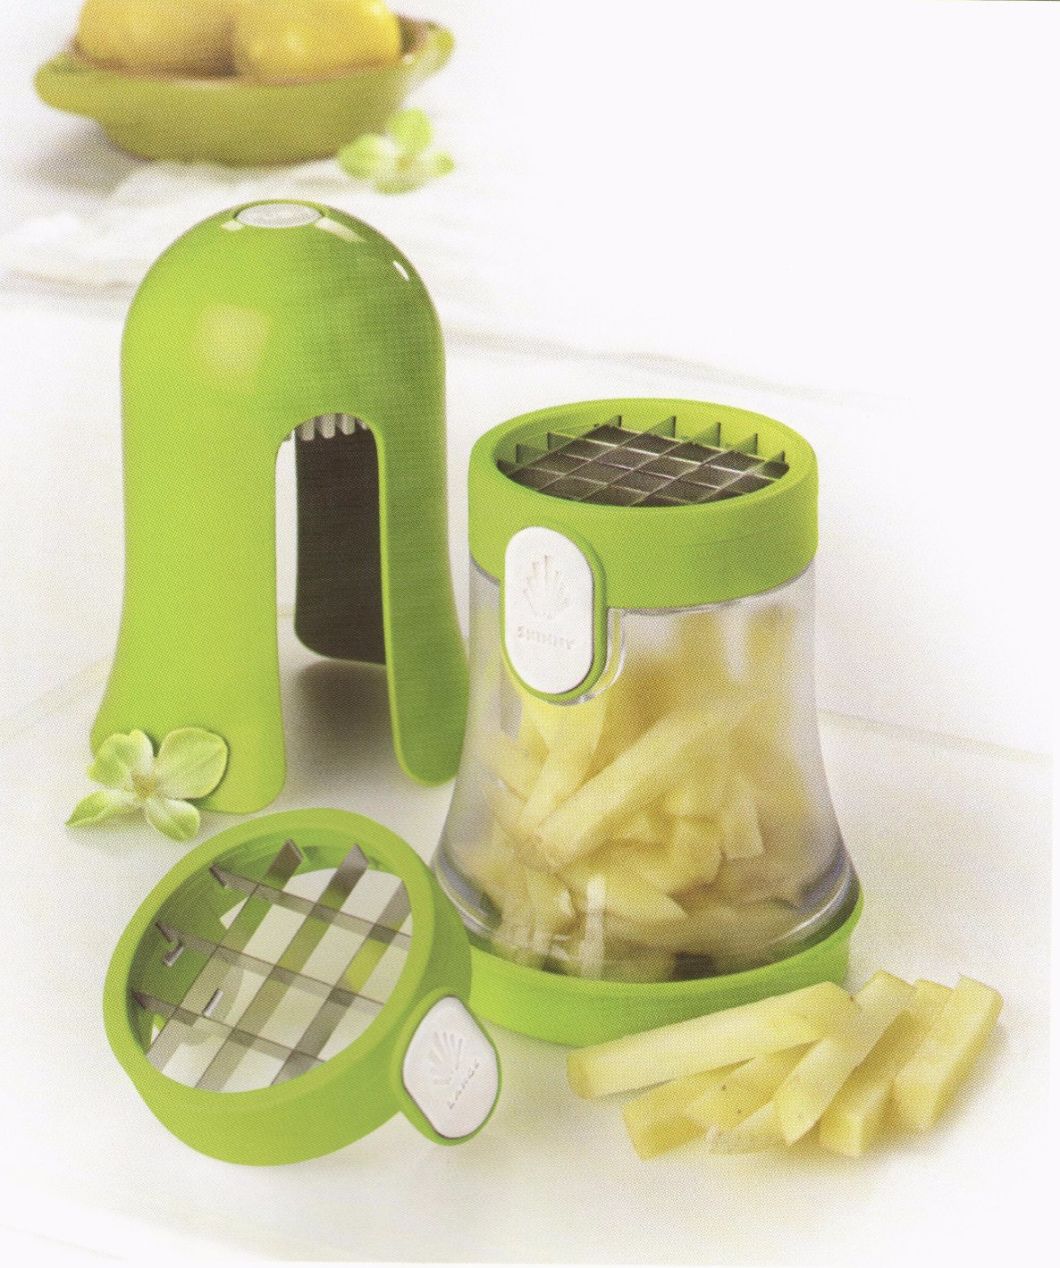 2 in 1 Fashion Home Appliance Plastic Vegetable Cutting Food Chopper Dice and Slice Machine Cg074